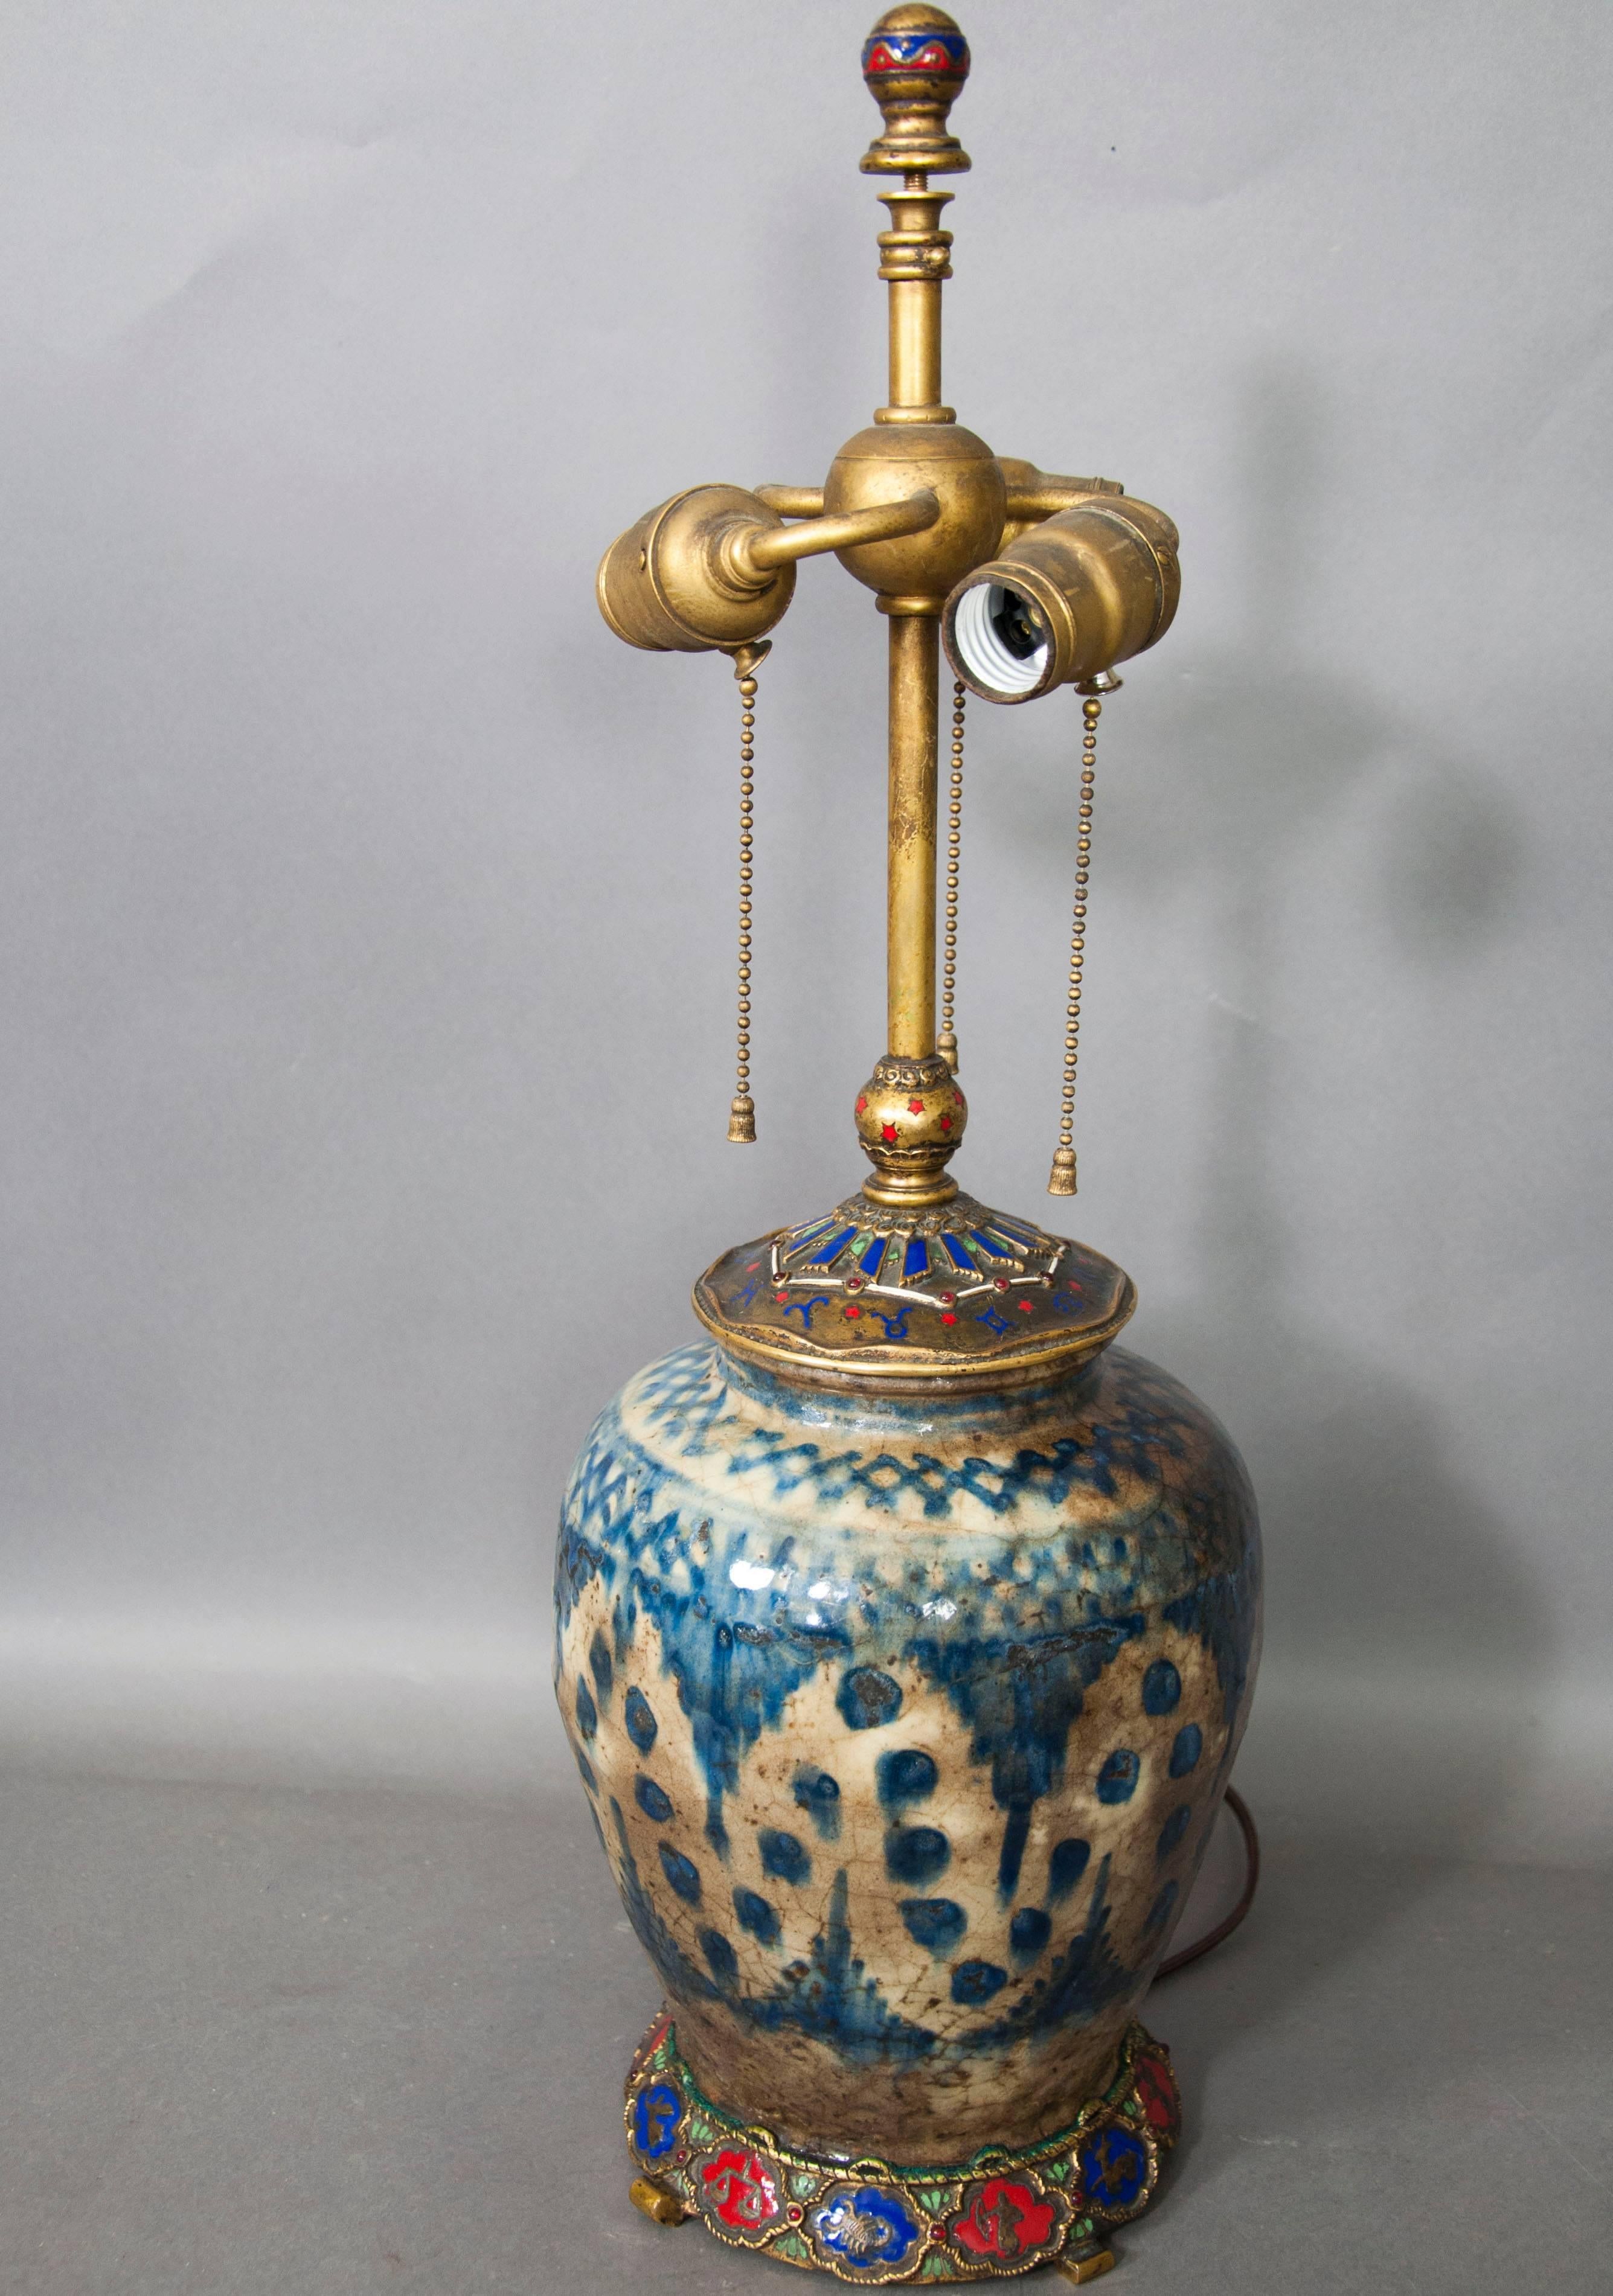 With enamelled ball form finial over three-light sockets, the globular blue and white vase dating from the 18th-19th century with decorated enamel cap and a base with all the figures of the zodiac.